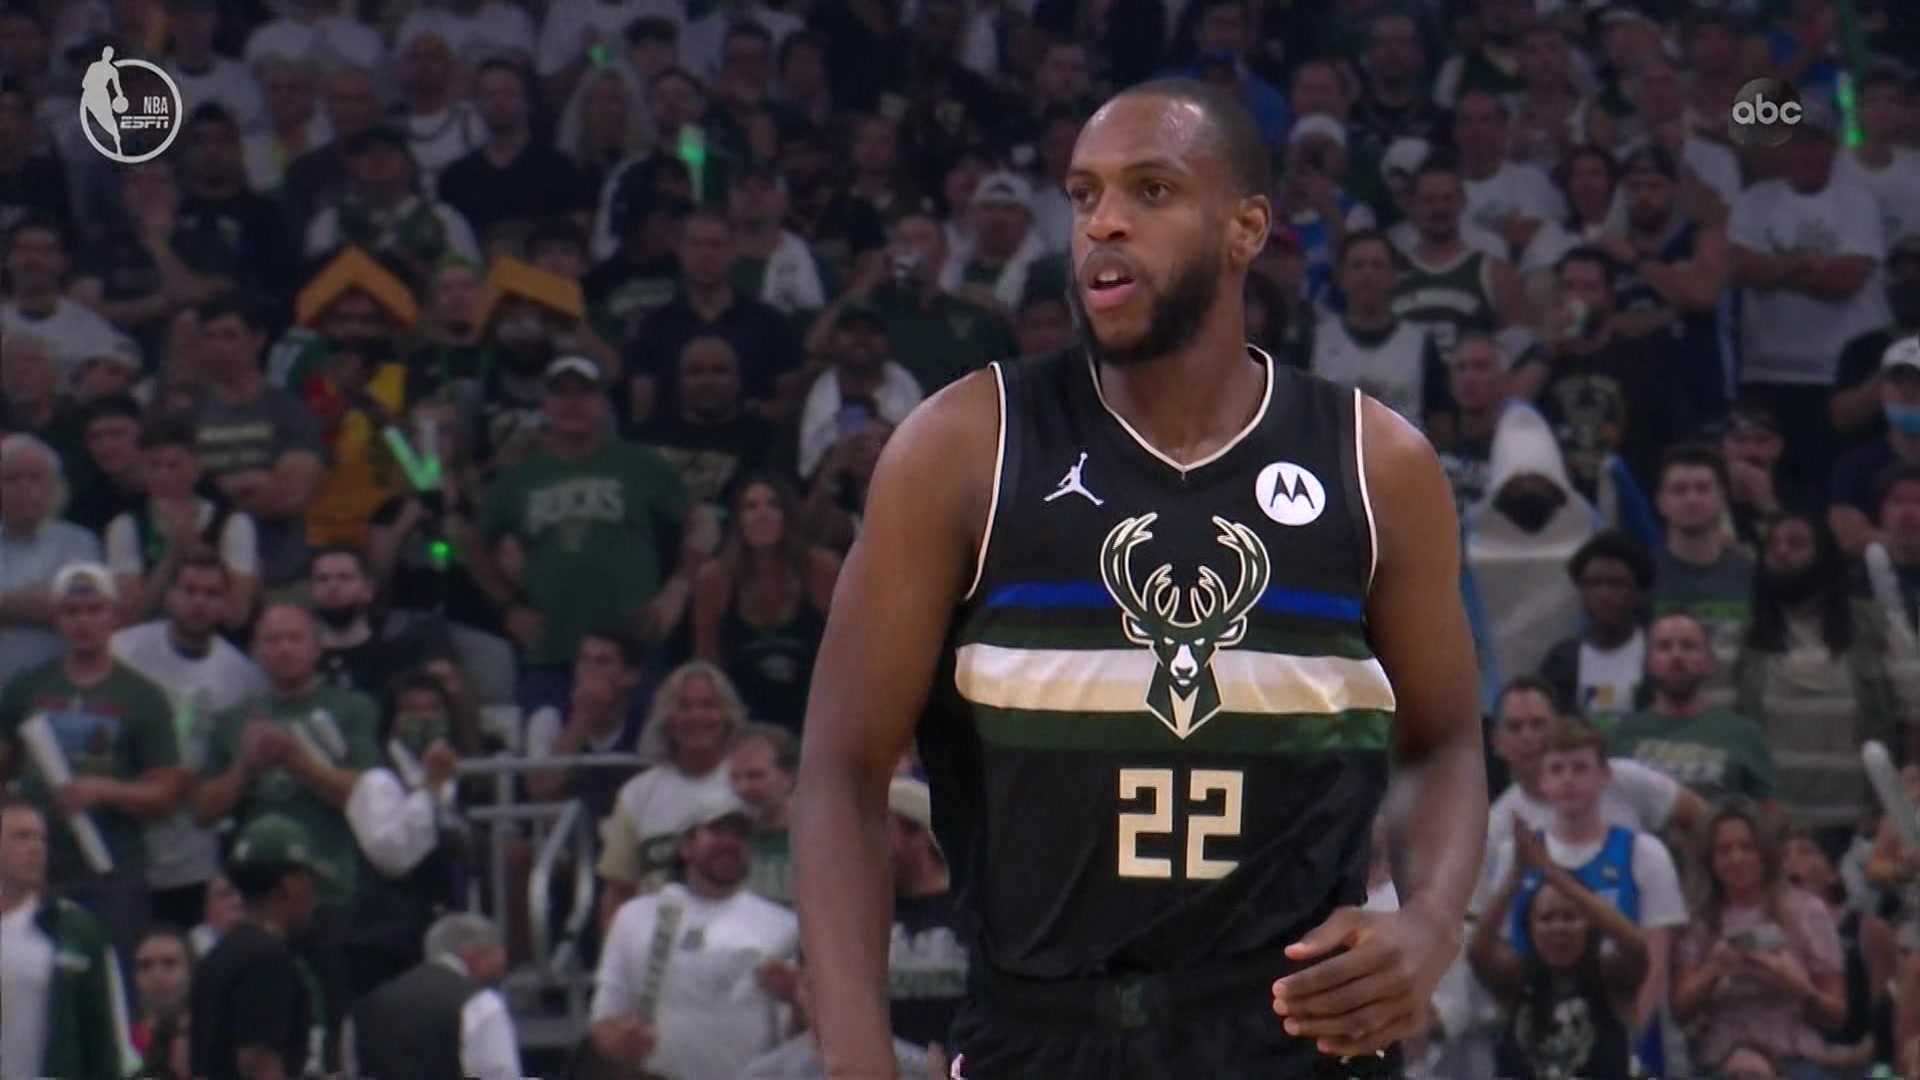 Khris Middleton selected to 2022 NBA All-Star Game